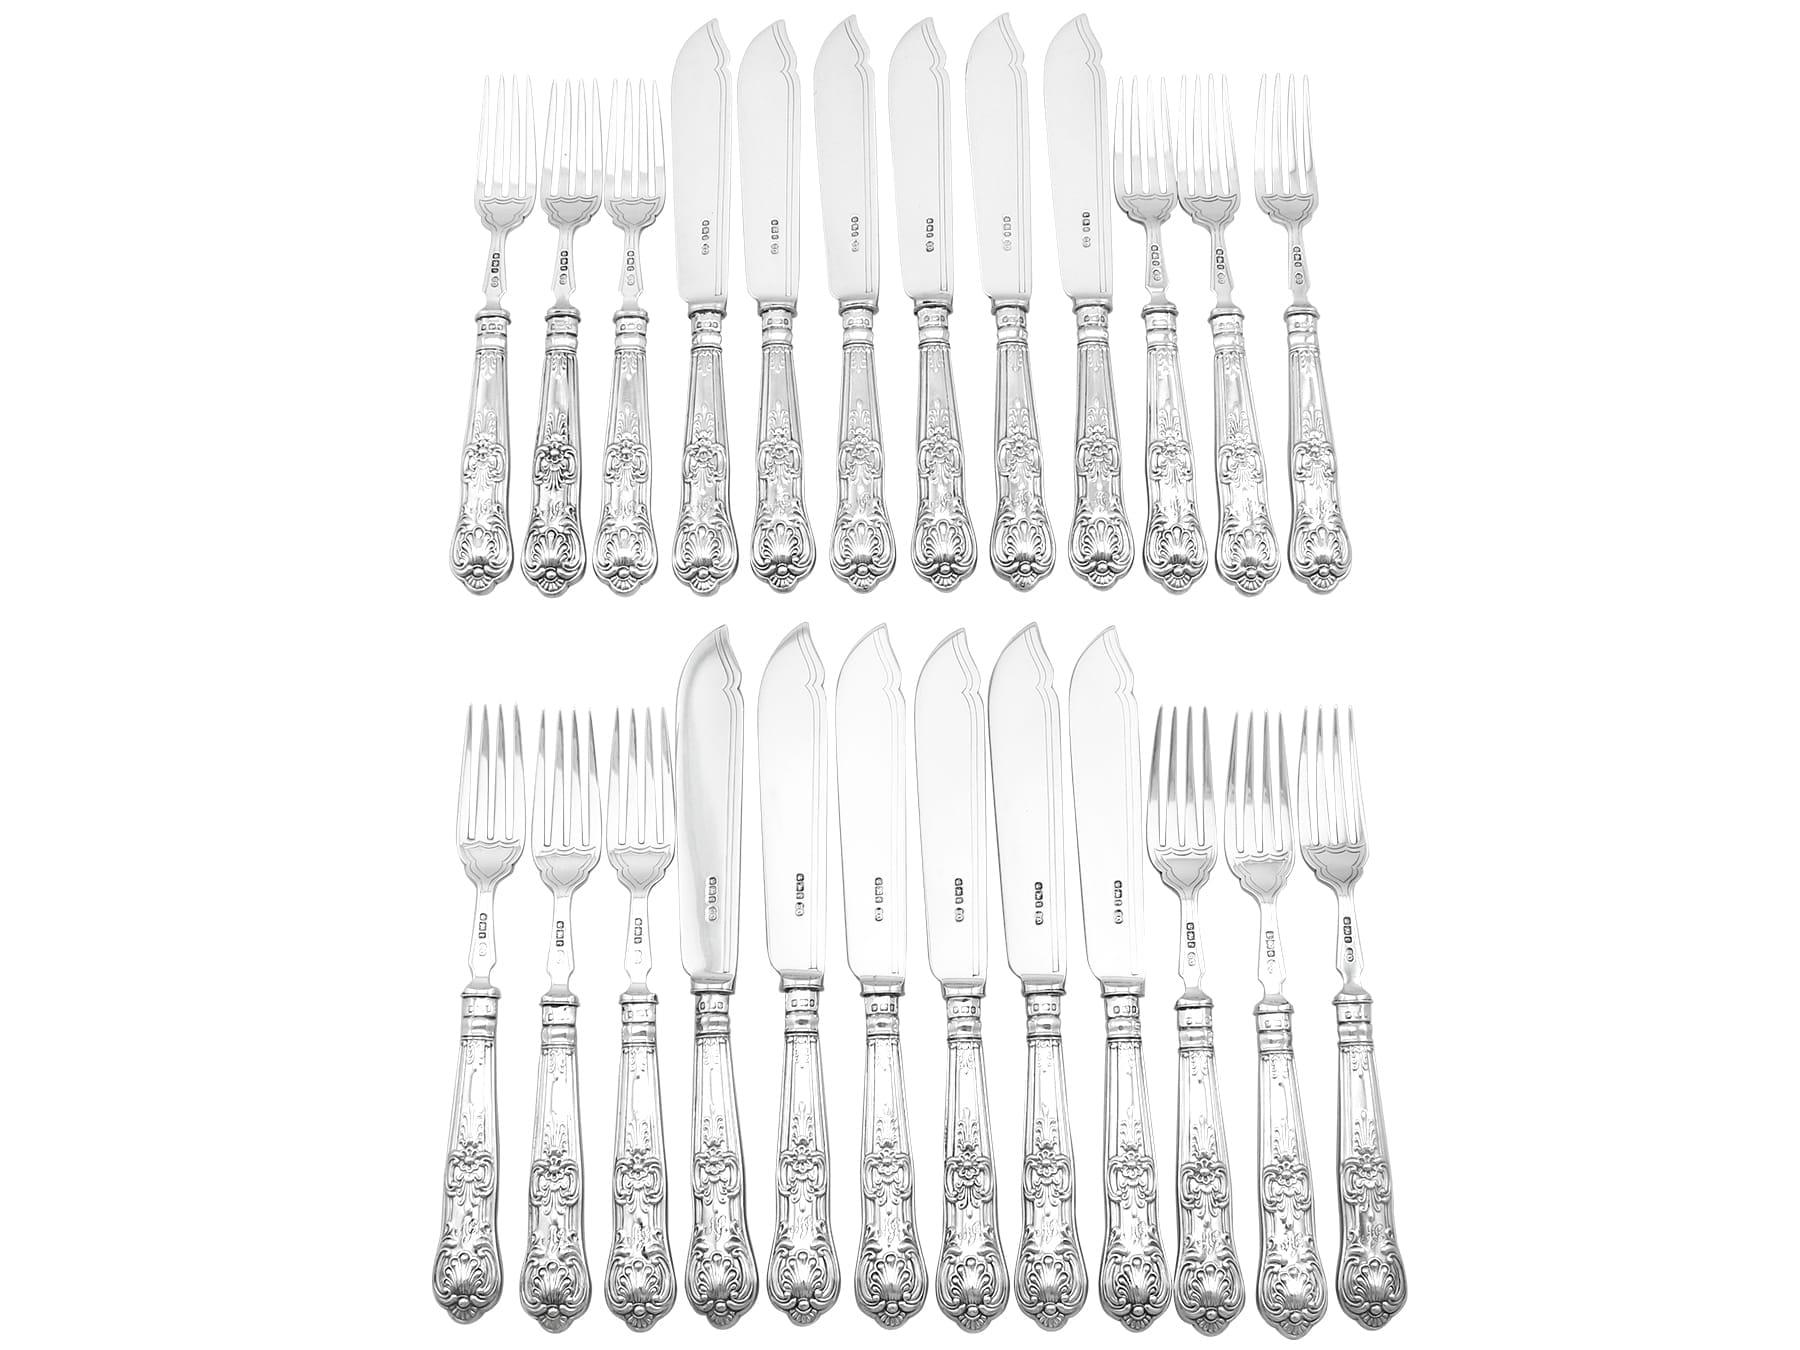 An exceptional, fine and impressive antique Victorian English sterling silver Queen's pattern fish cutlery set for twelve persons made by Hamilton & Inches - boxed; an addition to our dining silverware collection

This exceptional antique